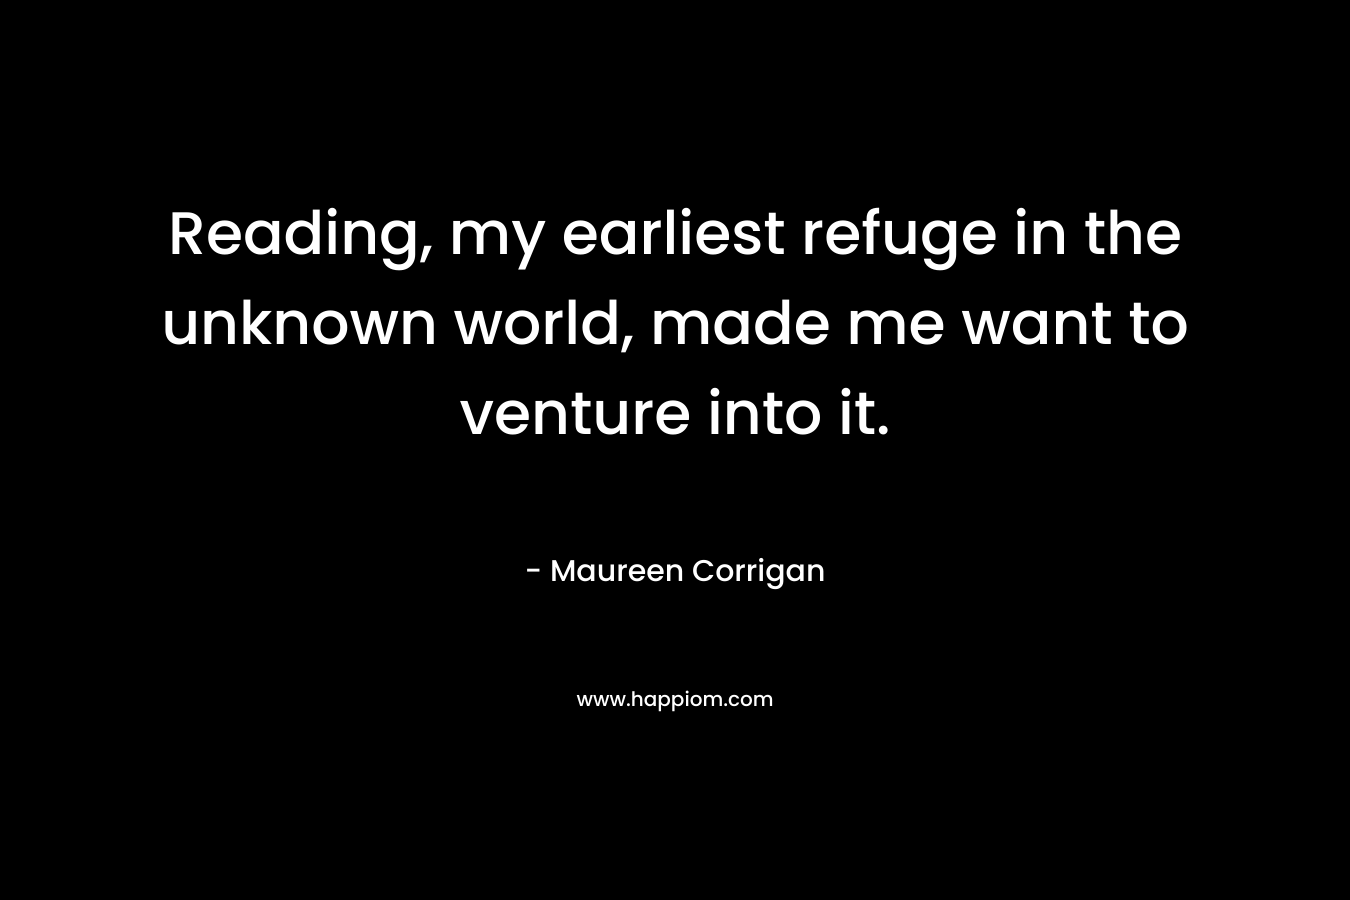 Reading, my earliest refuge in the unknown world, made me want to venture into it. – Maureen Corrigan